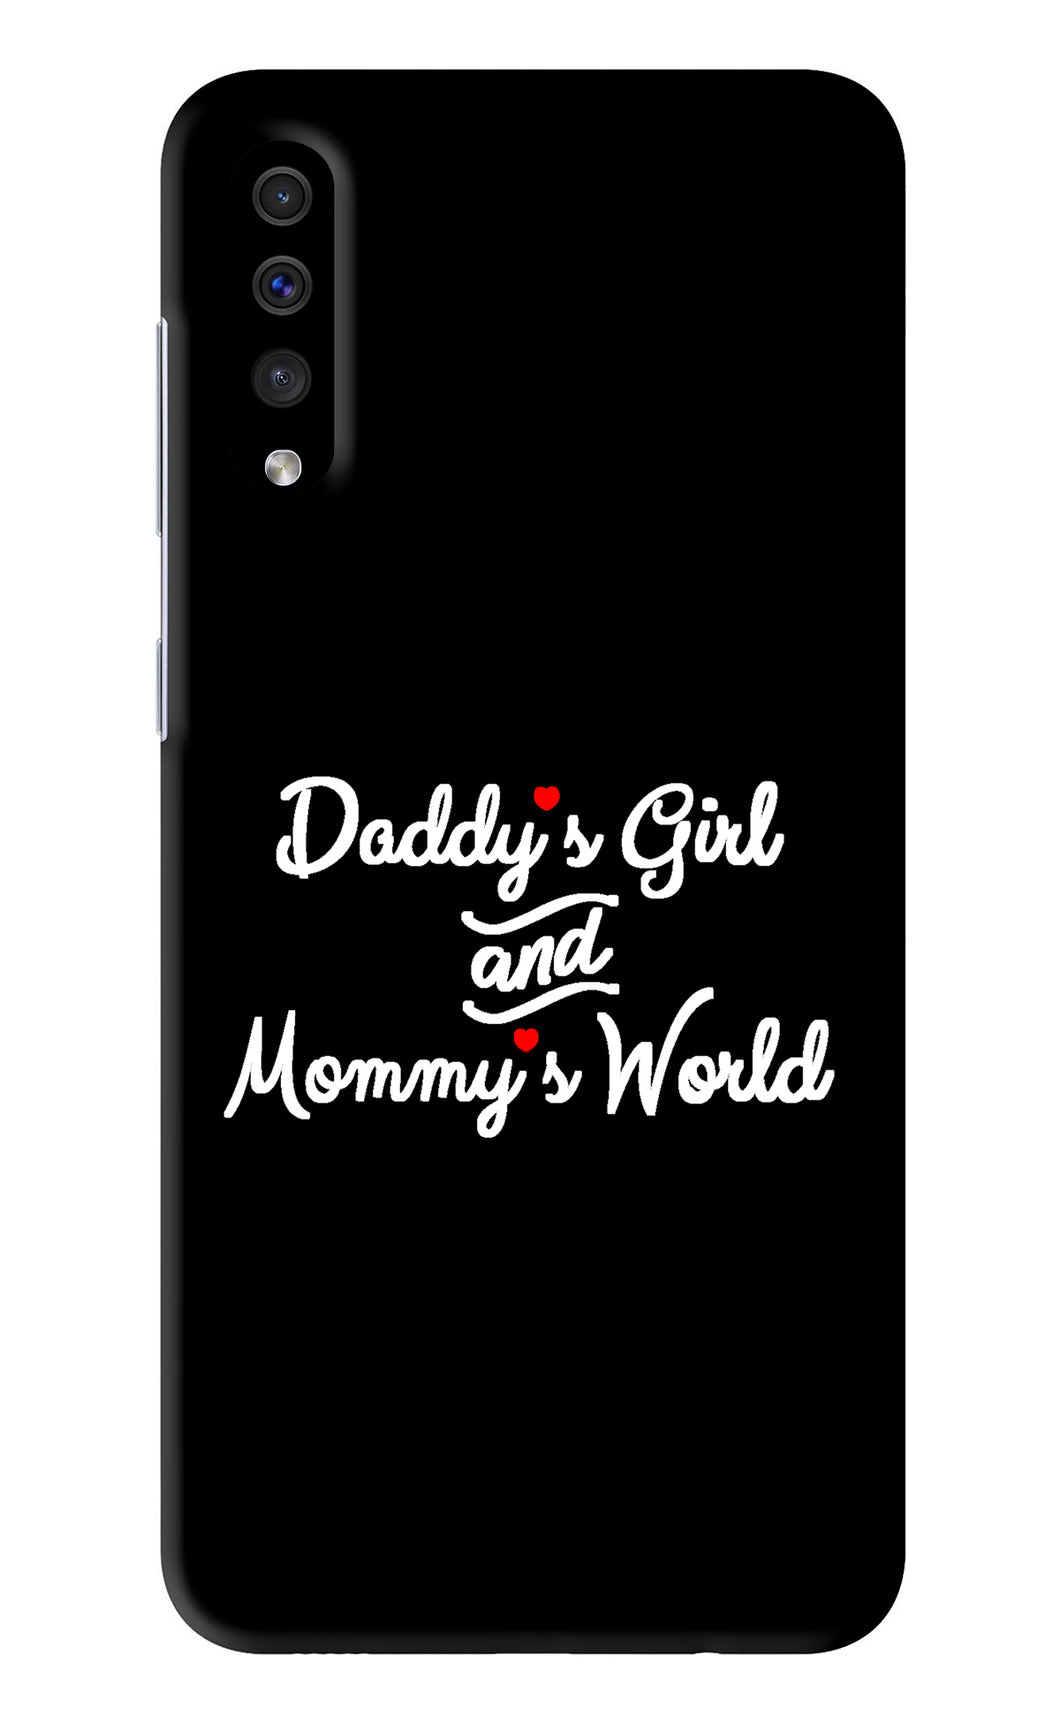 Daddy's Girl and Mommy's World Samsung Galaxy A50S Back Skin Wrap